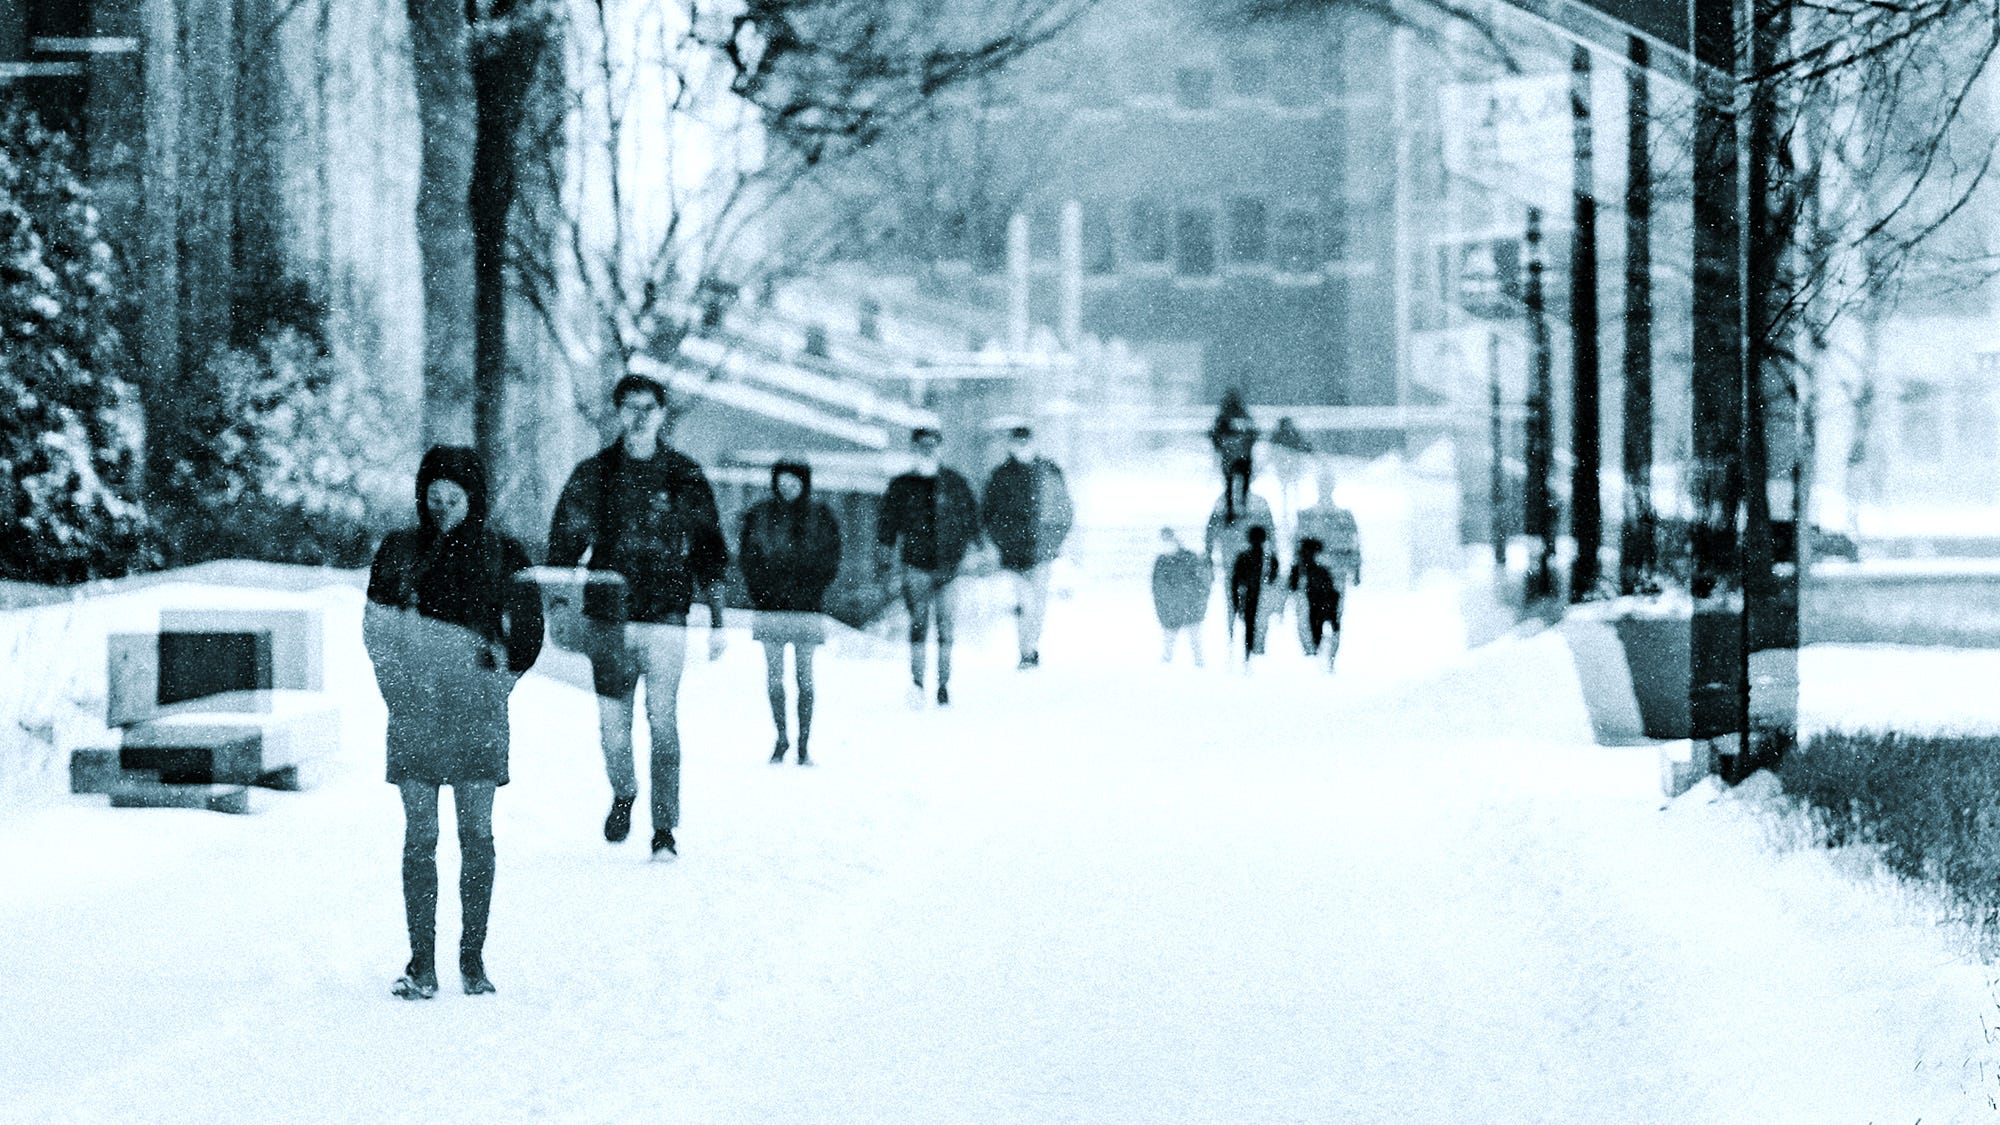 Students walk through the quad on the university campus. A double exposure photograph gives a sense of time passing by.